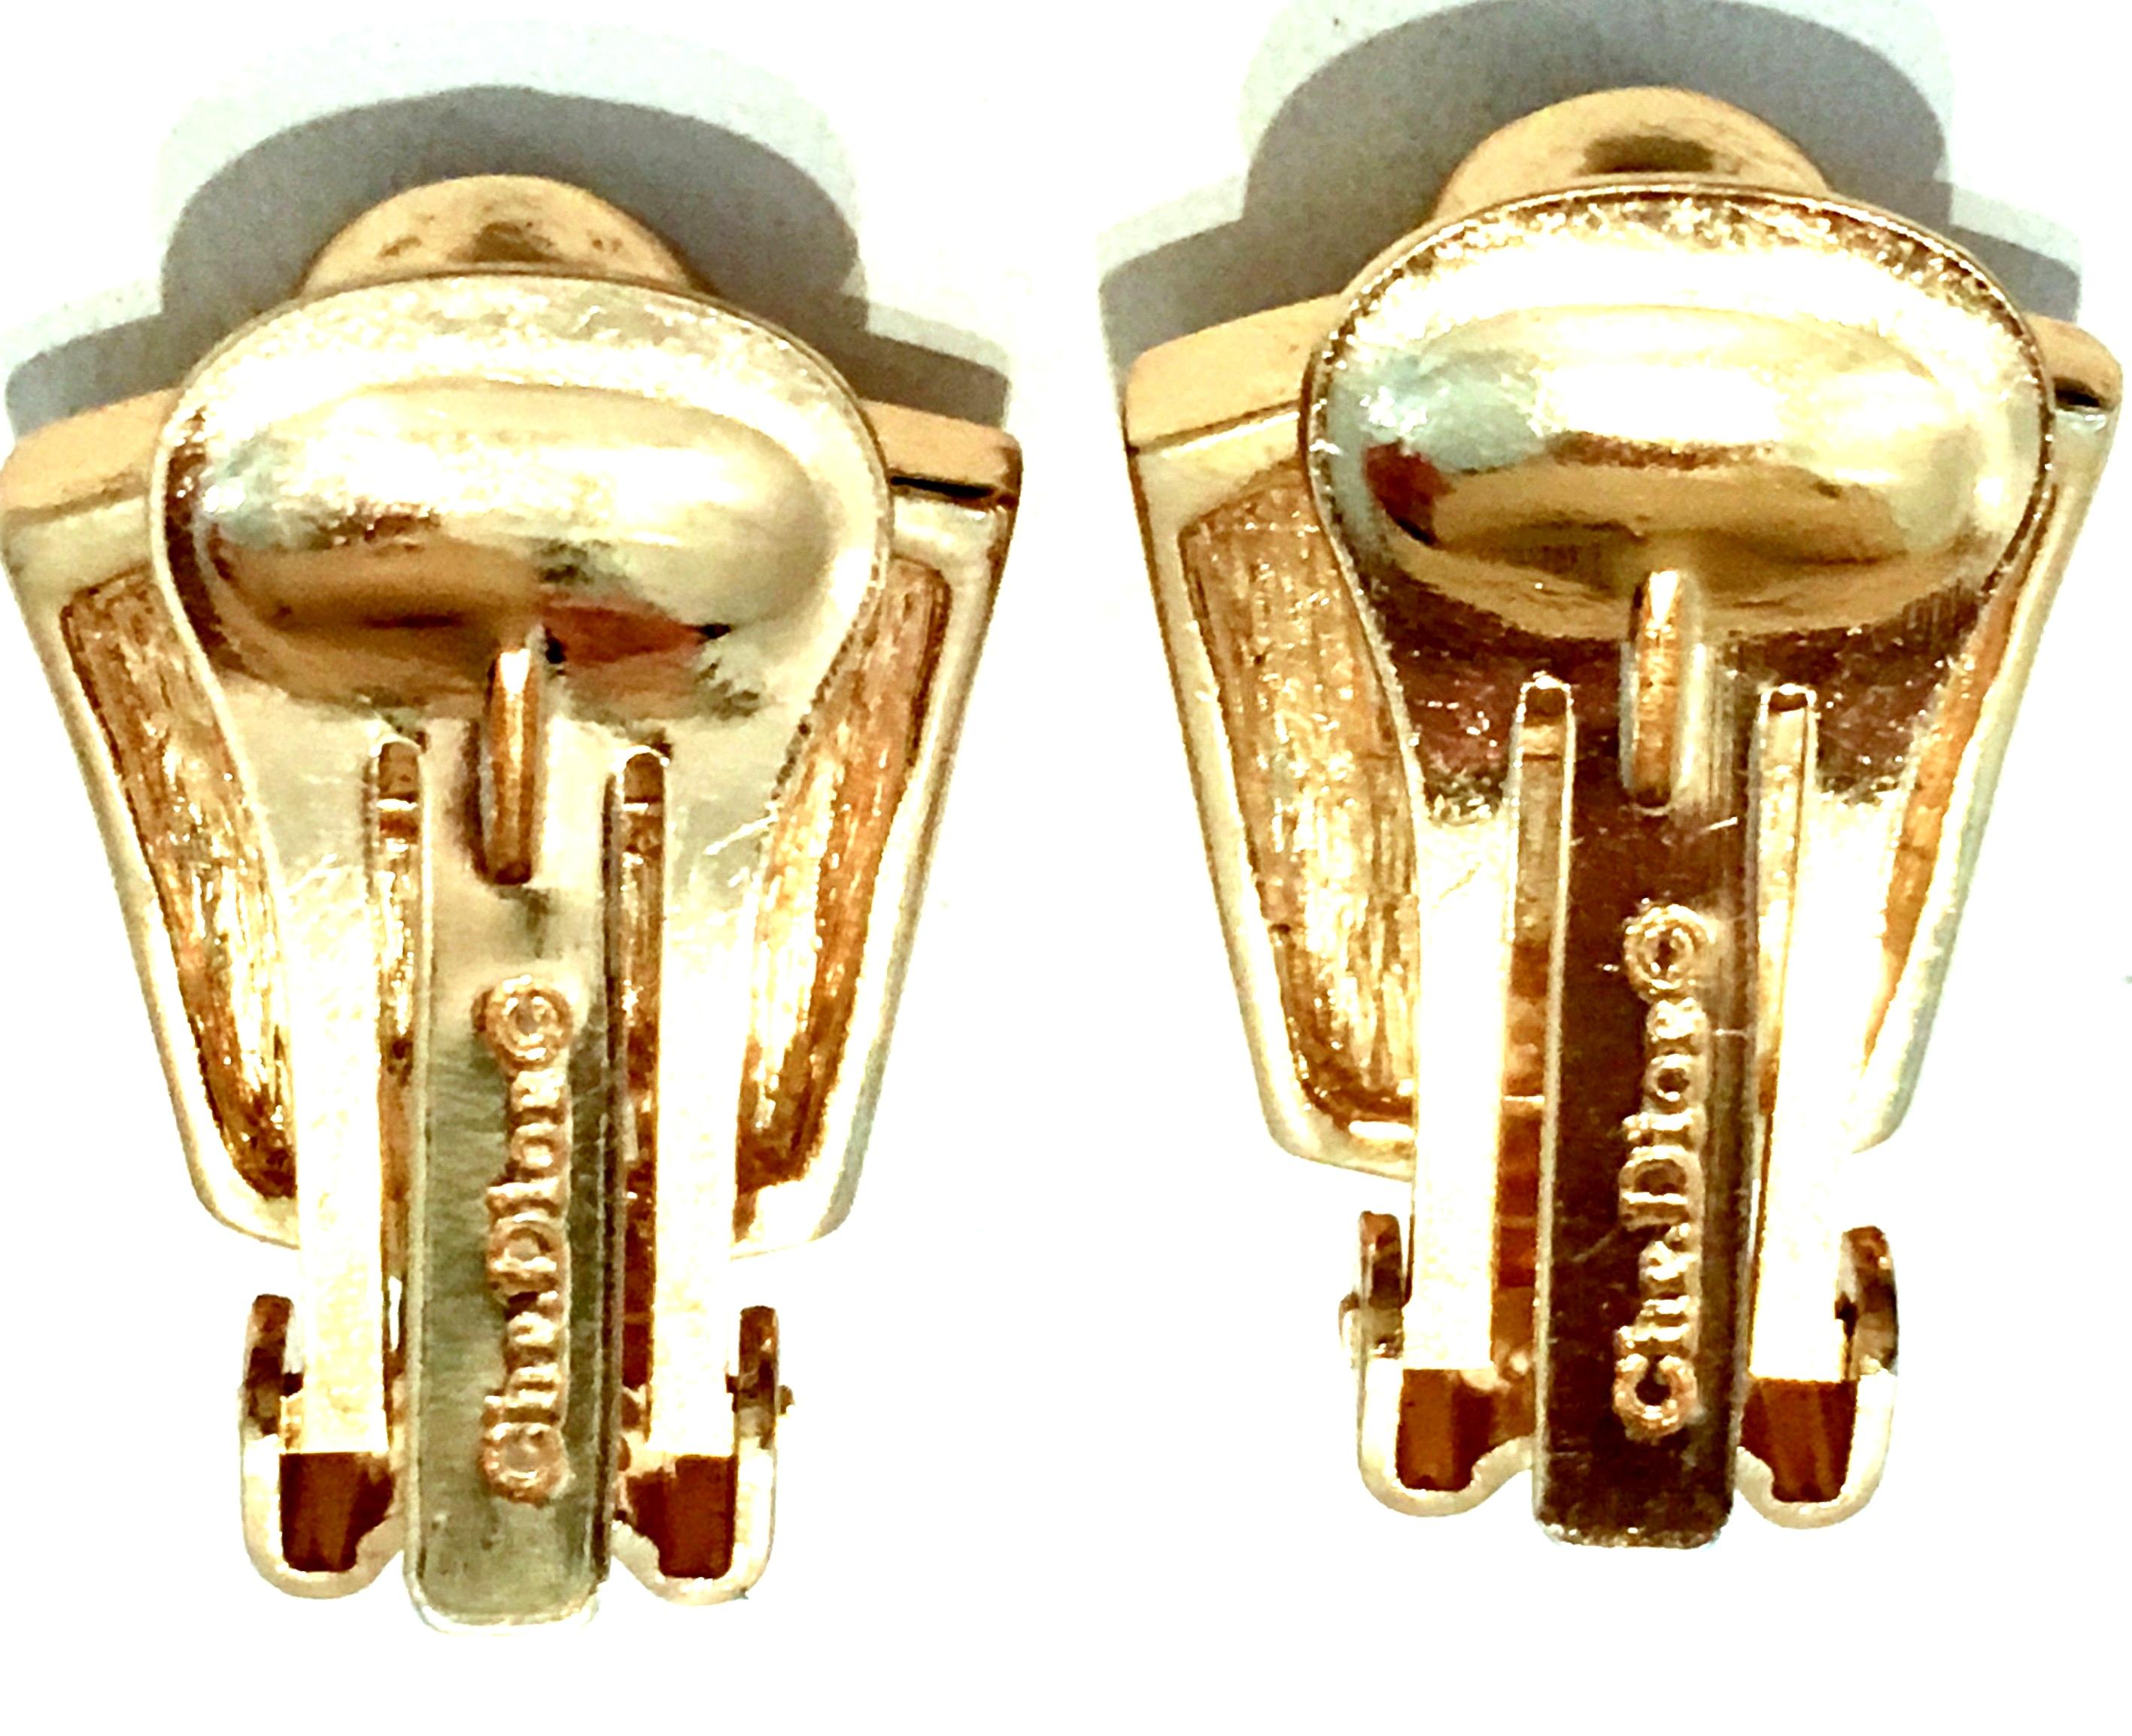 20th Century Gold Enamel & Swarovksi Crystal Earrings By, Christian Dior For Sale 3